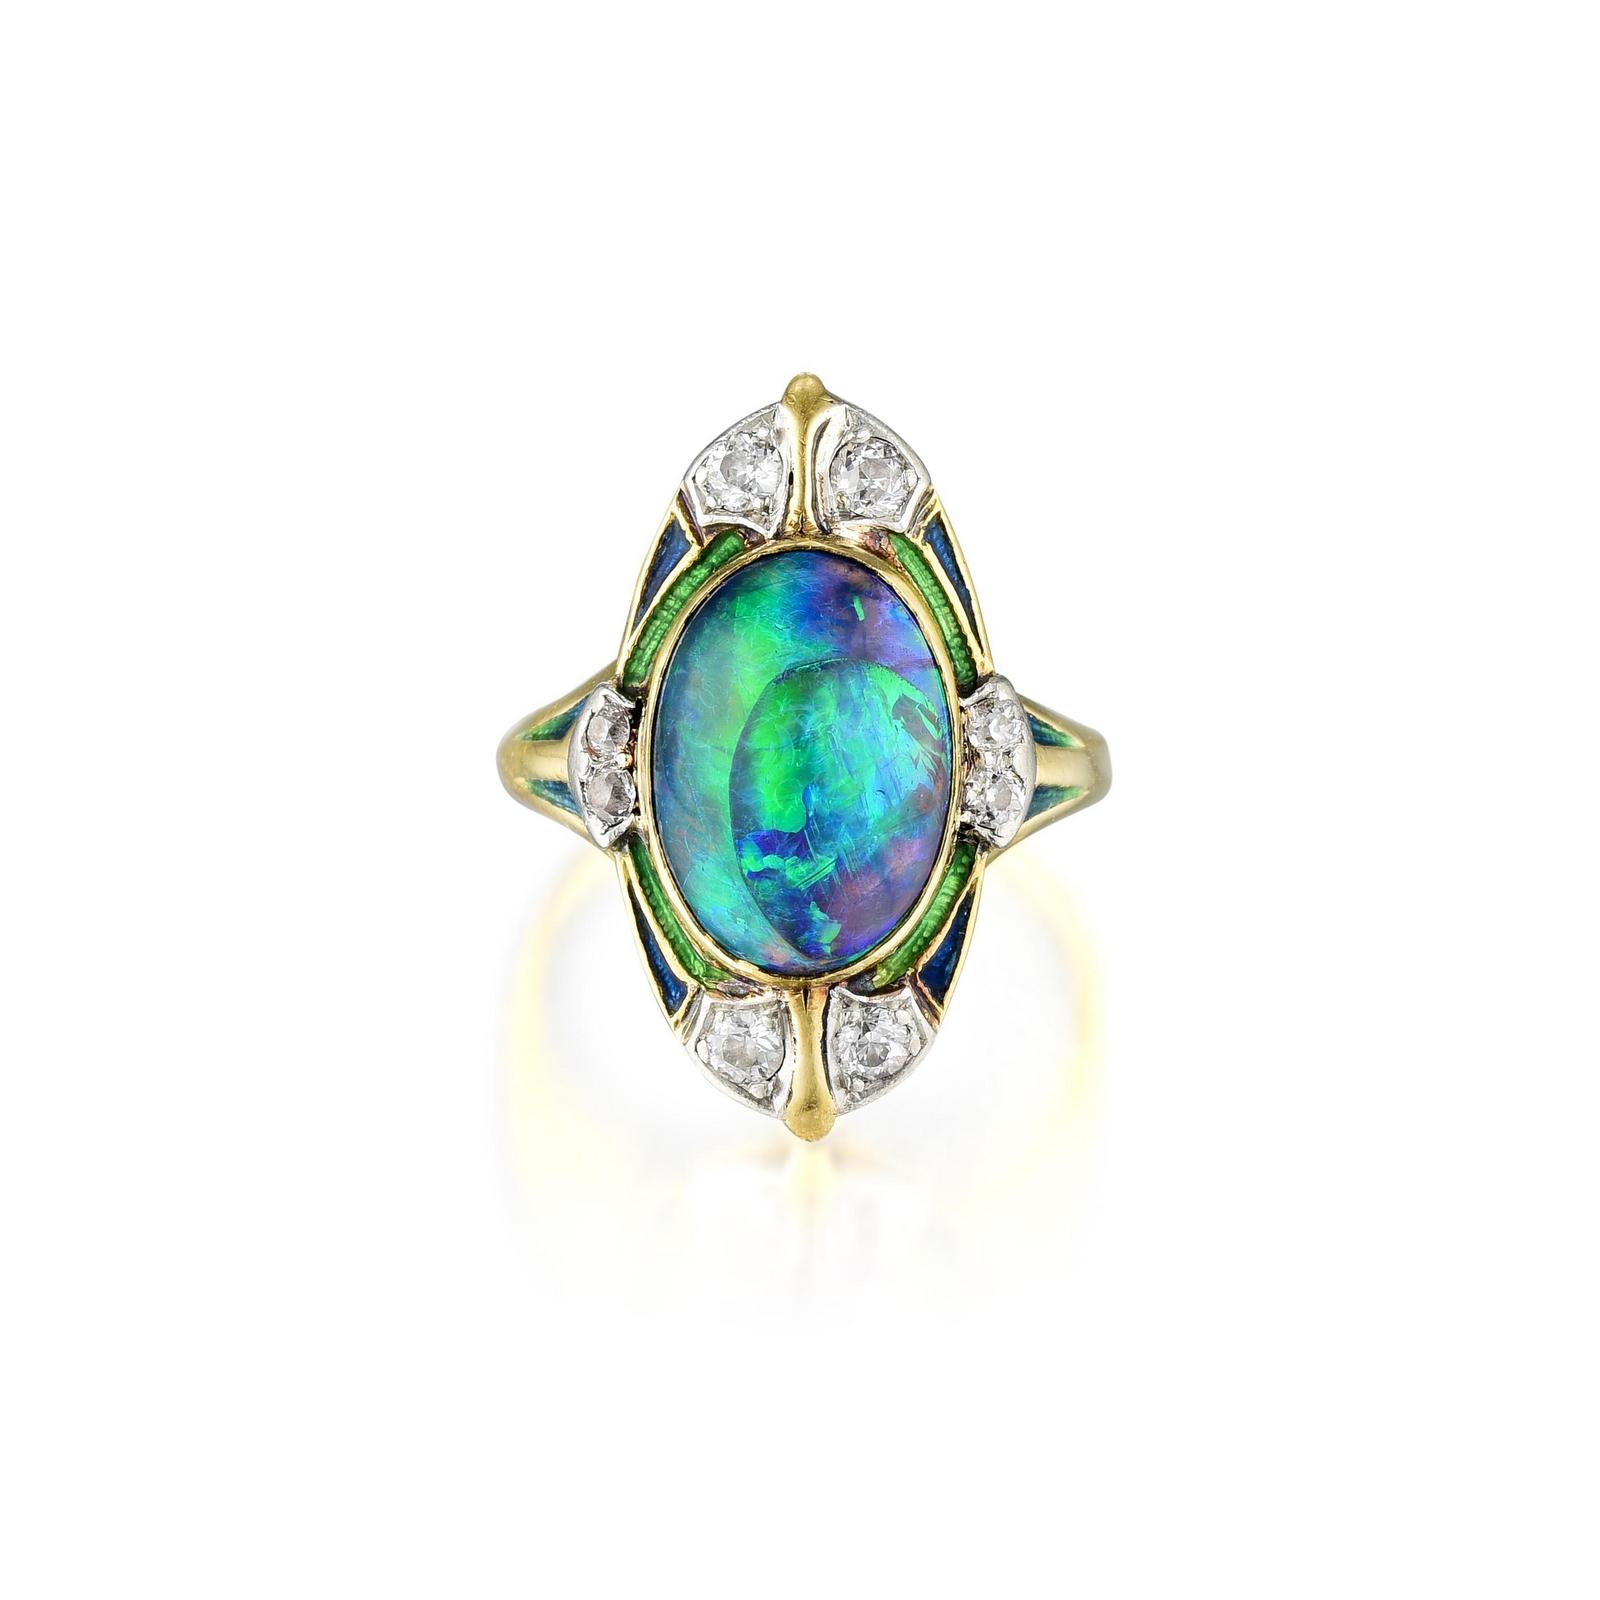 Louis Comfort Tiffany and Co. Black Opal, Diamond and Enamel Ring